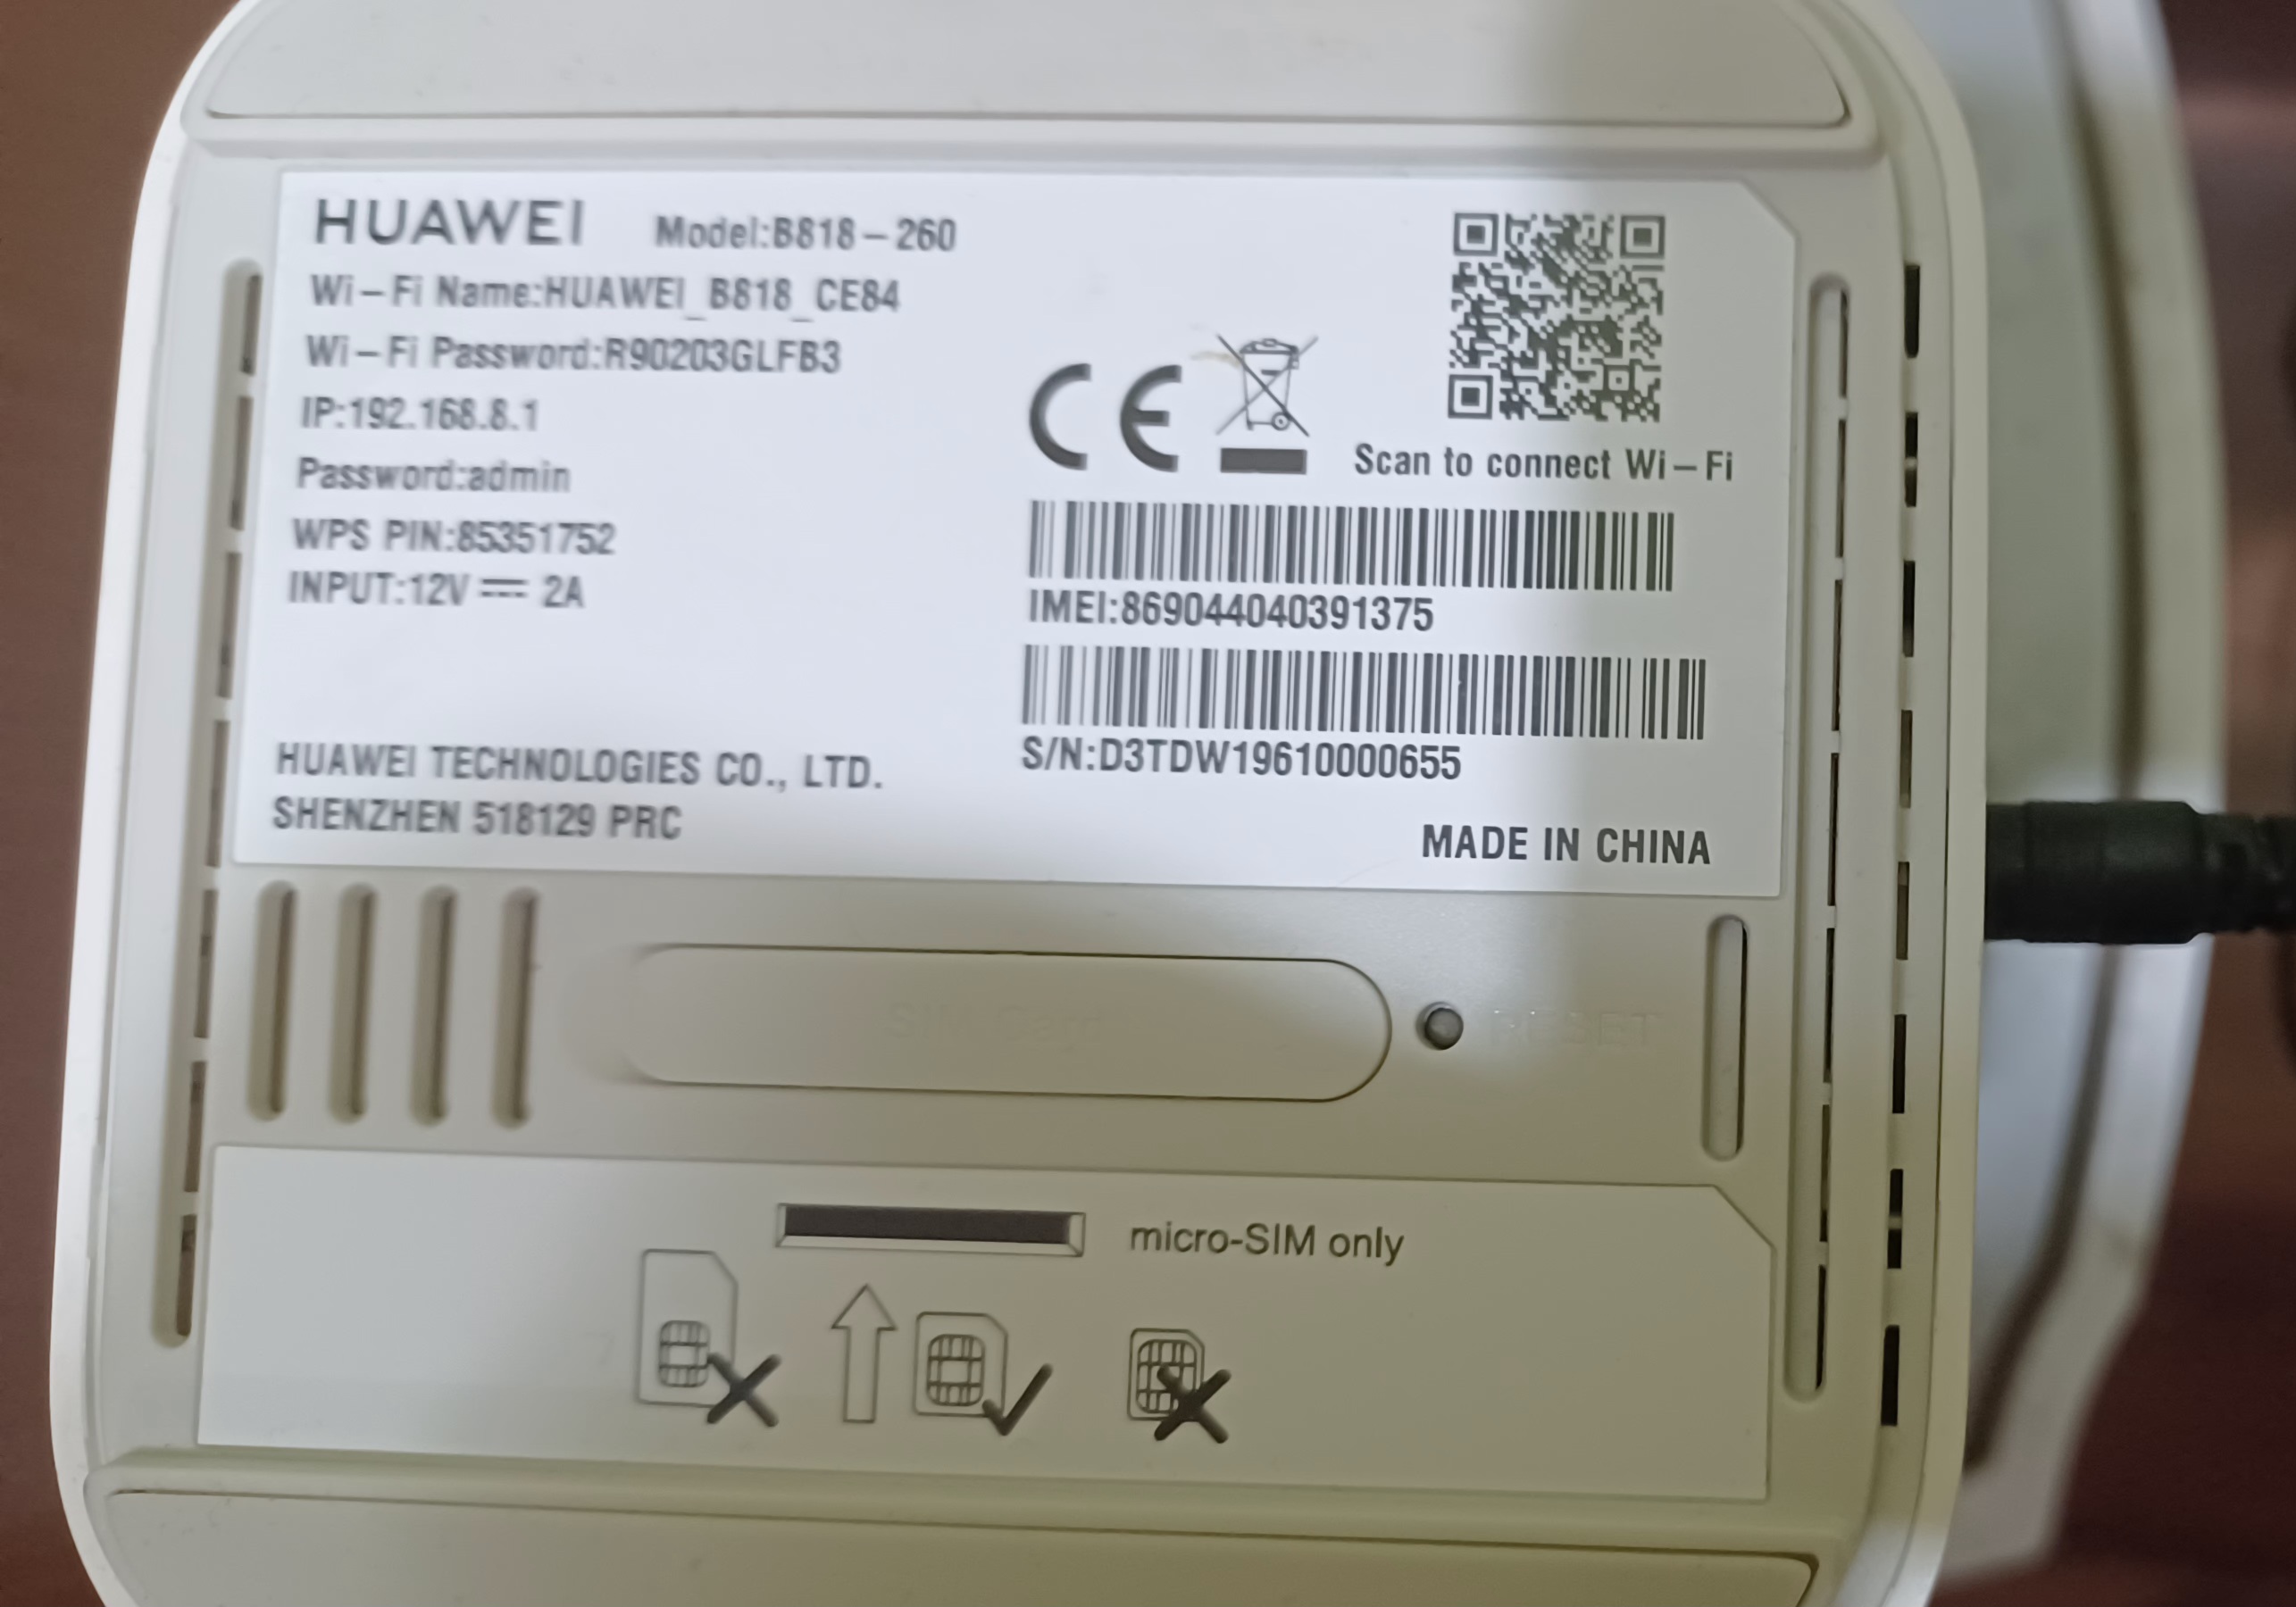 HUAWEI B818-260 tower router for sale 15 KWD